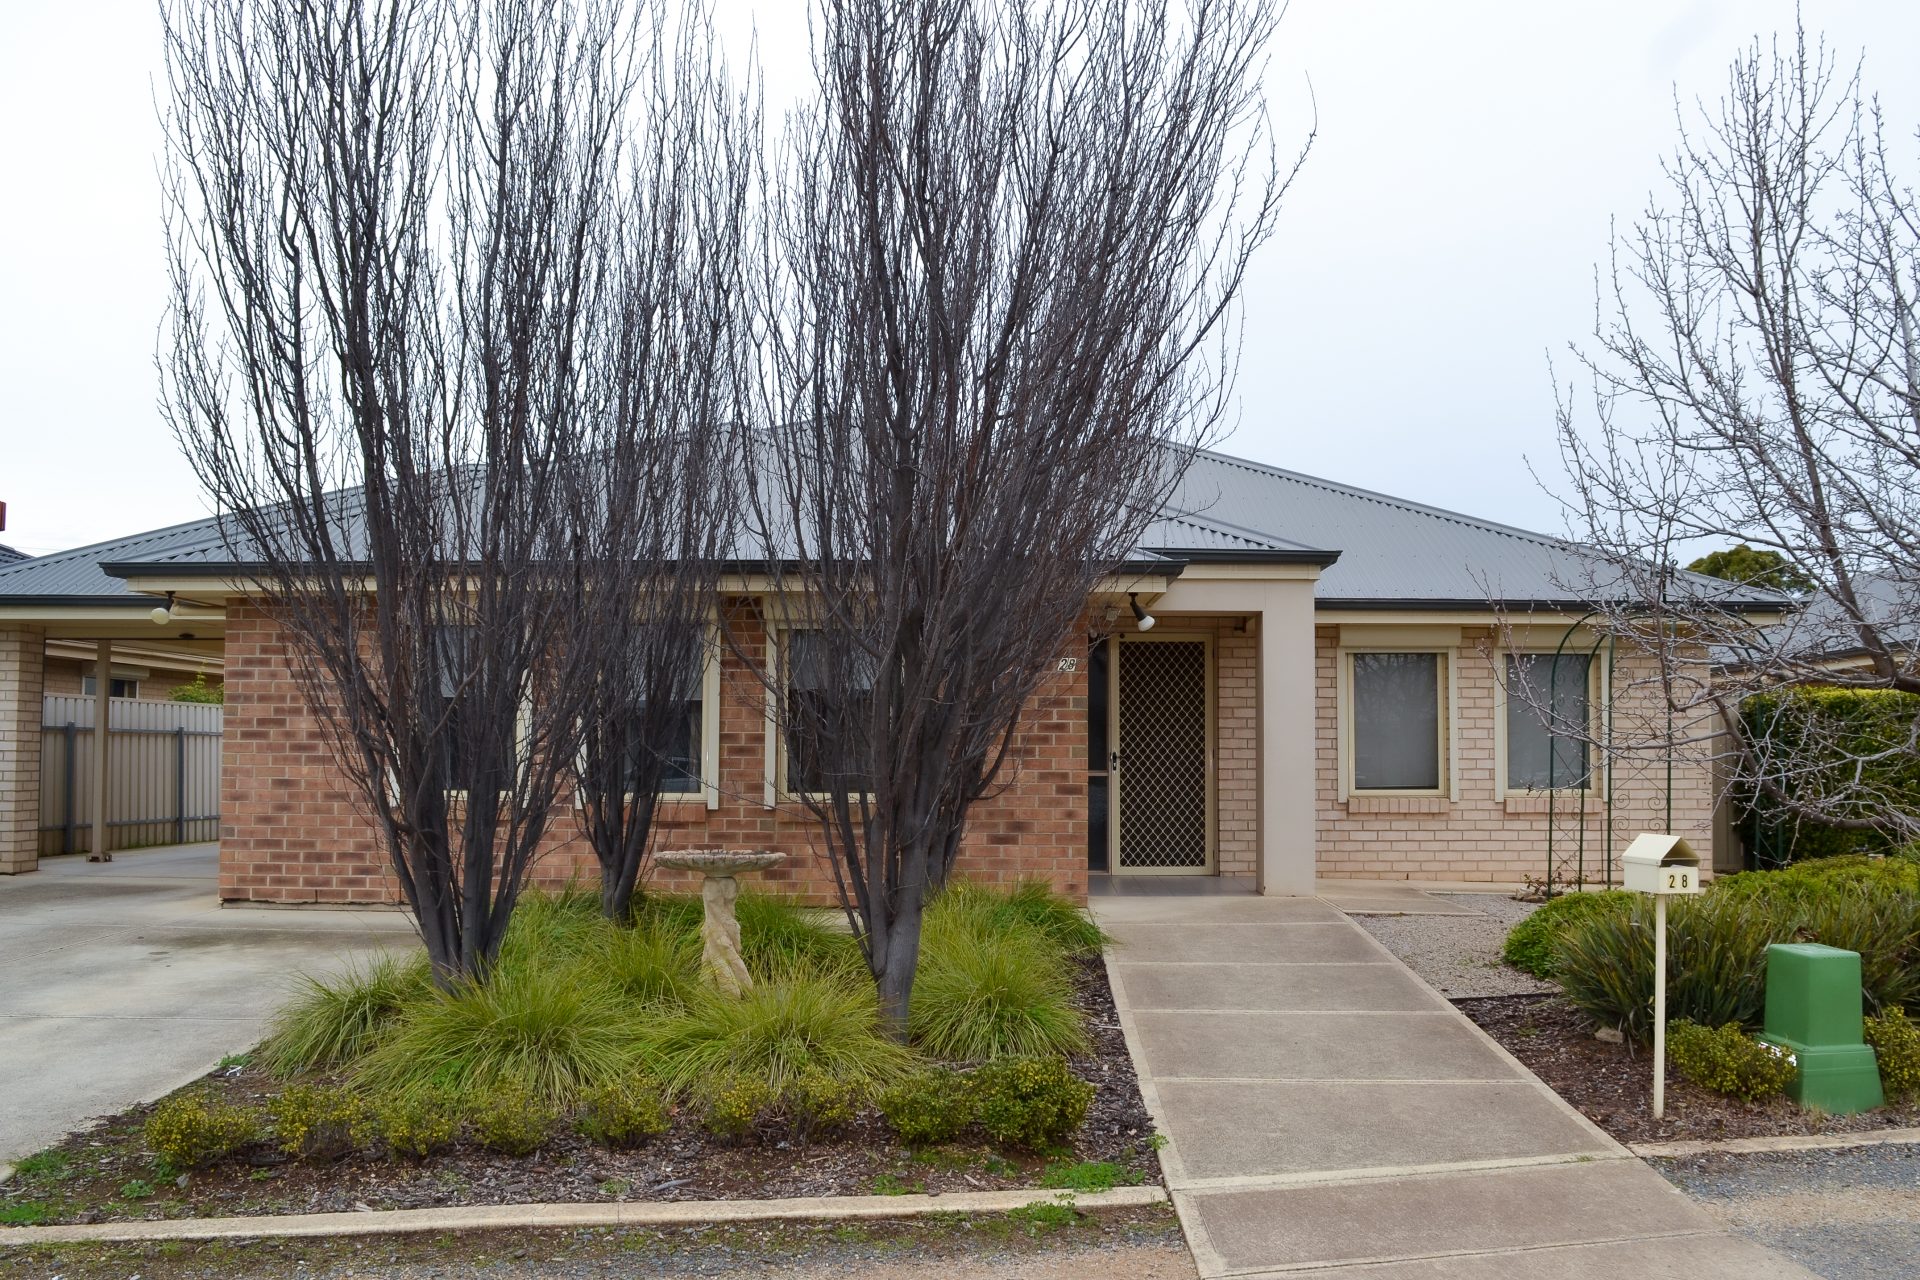 Morphetteville home 1, external front facade. Brown and yellow bricks with a grey tin roof. Tree lined driveway and footpath. 